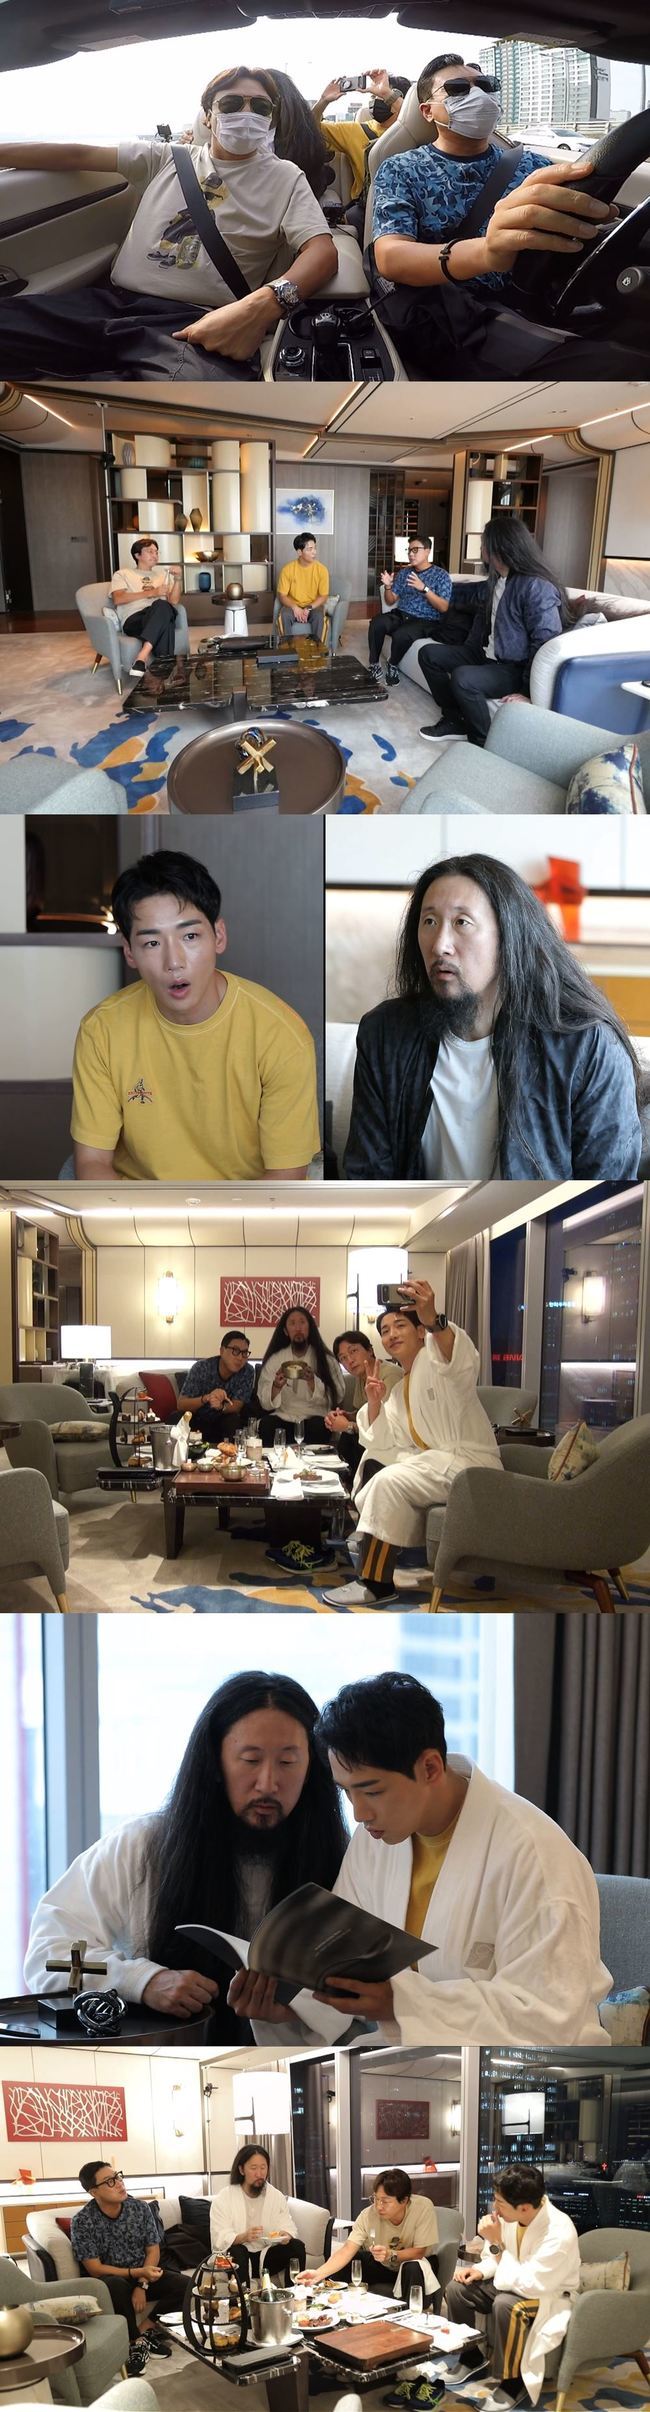 In SBS My Little Old Boy, My Little Old Boy representative Stephanie Herseth Sandlin Combination Lee Sang-min and Tak Jae-hun give Rooftop Brothers Park Gun and Seo Nam-yong a memorable experience.In the recent My Little Old Boy recording, a supercar appeared in front of Park Gun.Then, the entire studio was sulking when the unexpected characters Lee Sang-min and Tak Jae-hun came down from the supercar.Lee Sang-min, Tak Jae-hun set up a special tour for her younger siblings.The two of them laughed at the Morbengers by unfolding the open car Stephanie Herseth Sandlin, saying, Have you ever been on this?The four then headed to Logan Lees house in the SBS drama Penthouse, which ended in the topic, and a five-star hotel in central Seoul.The studio was amazed when the cost of the finest furniture exceeding tens of millions of won and the accommodation cost exceeding 20 million won per night were revealed.Seo Jang-hoon said to Sangmin, Please move without a deposit.Park Gun and Seo Nam-yong admired Sangmin and Jae-hoons Stephanie Herseth Sandlin, who had been in the luxury hotel during their heyday, but embarrassed the table tennis by comparing the caviar tasting with Changnan is more delicious.The successful tour of the luxury tour of the table table prepared for the younger sisters will be released on October 10 at 9:05 pm.